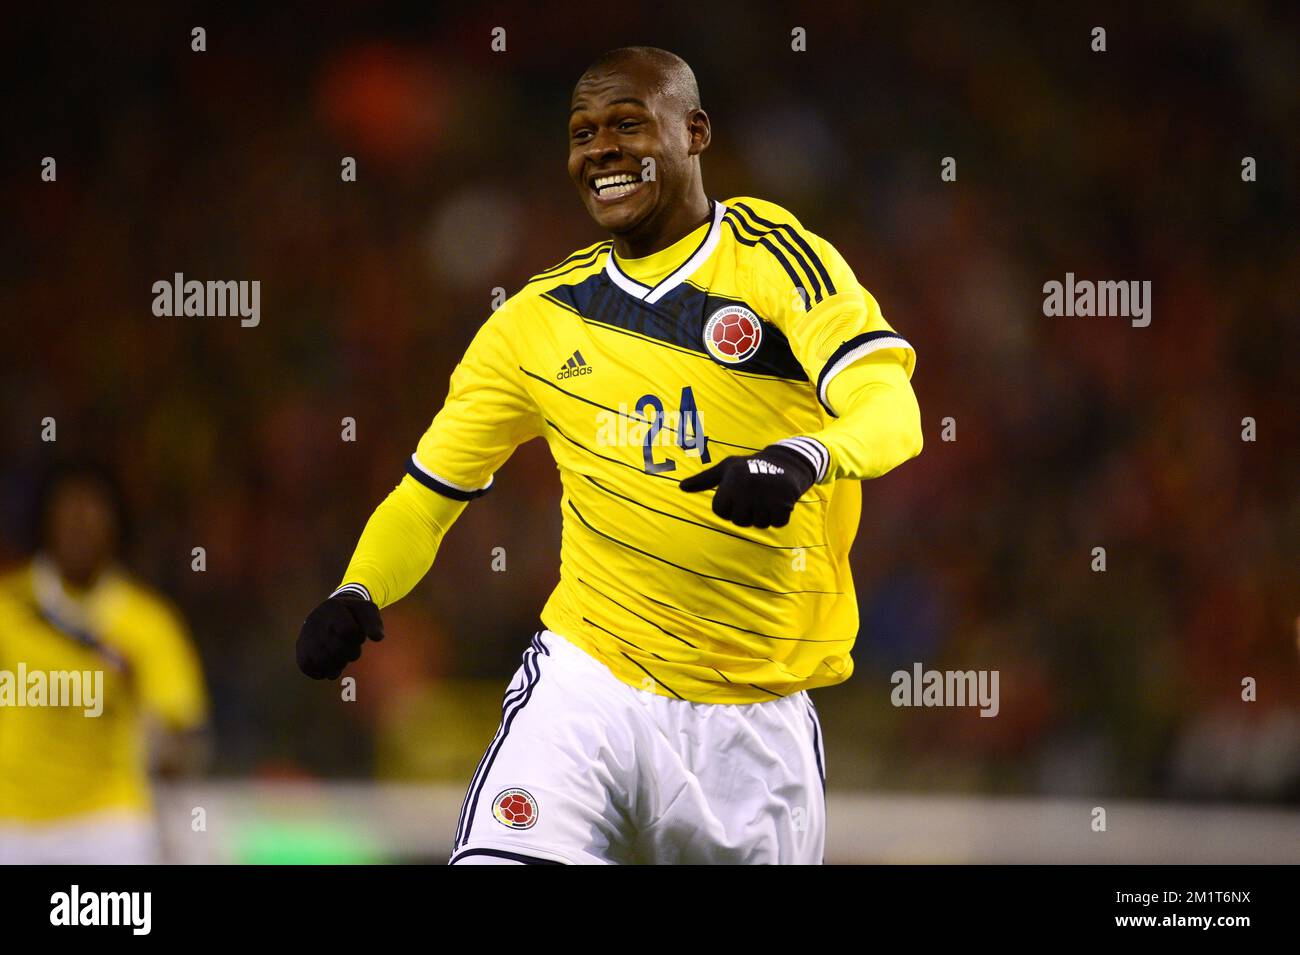 Colombia's Victor Ibarbo celebrates after scoring the 0-2 goal during a friendly soccer game between the Belgian national soccer team Red Devils and Colombia, at the Koning Boudewijn Stadion - Stade Roi Baudouin in Brussels, on Thursday 14 November 2013. BELGA PHOTO YORICK JANSENS Stock Photo